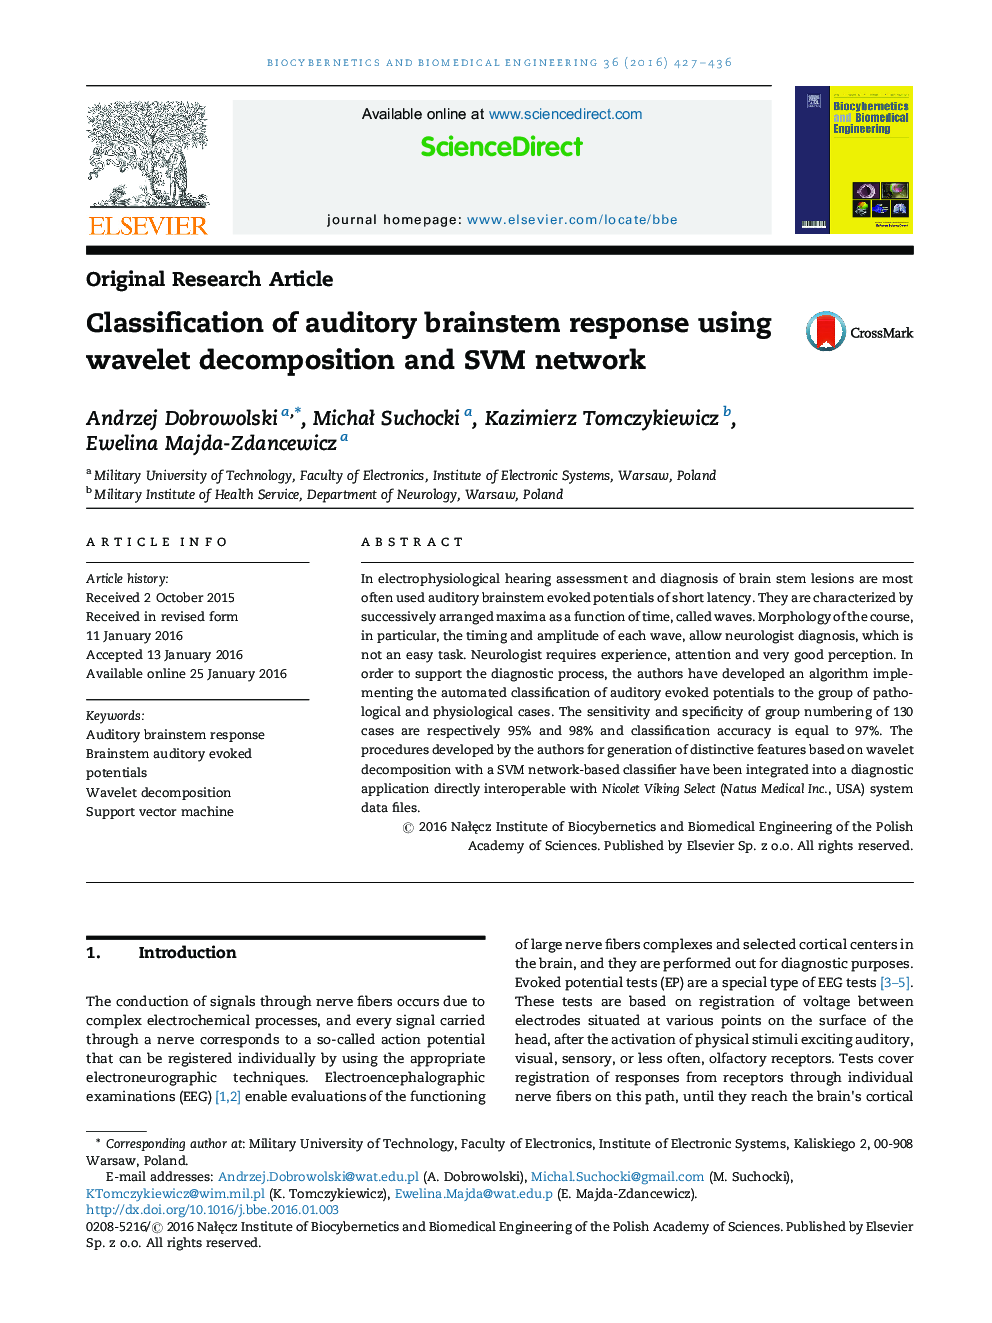 Classification of auditory brainstem response using wavelet decomposition and SVM network